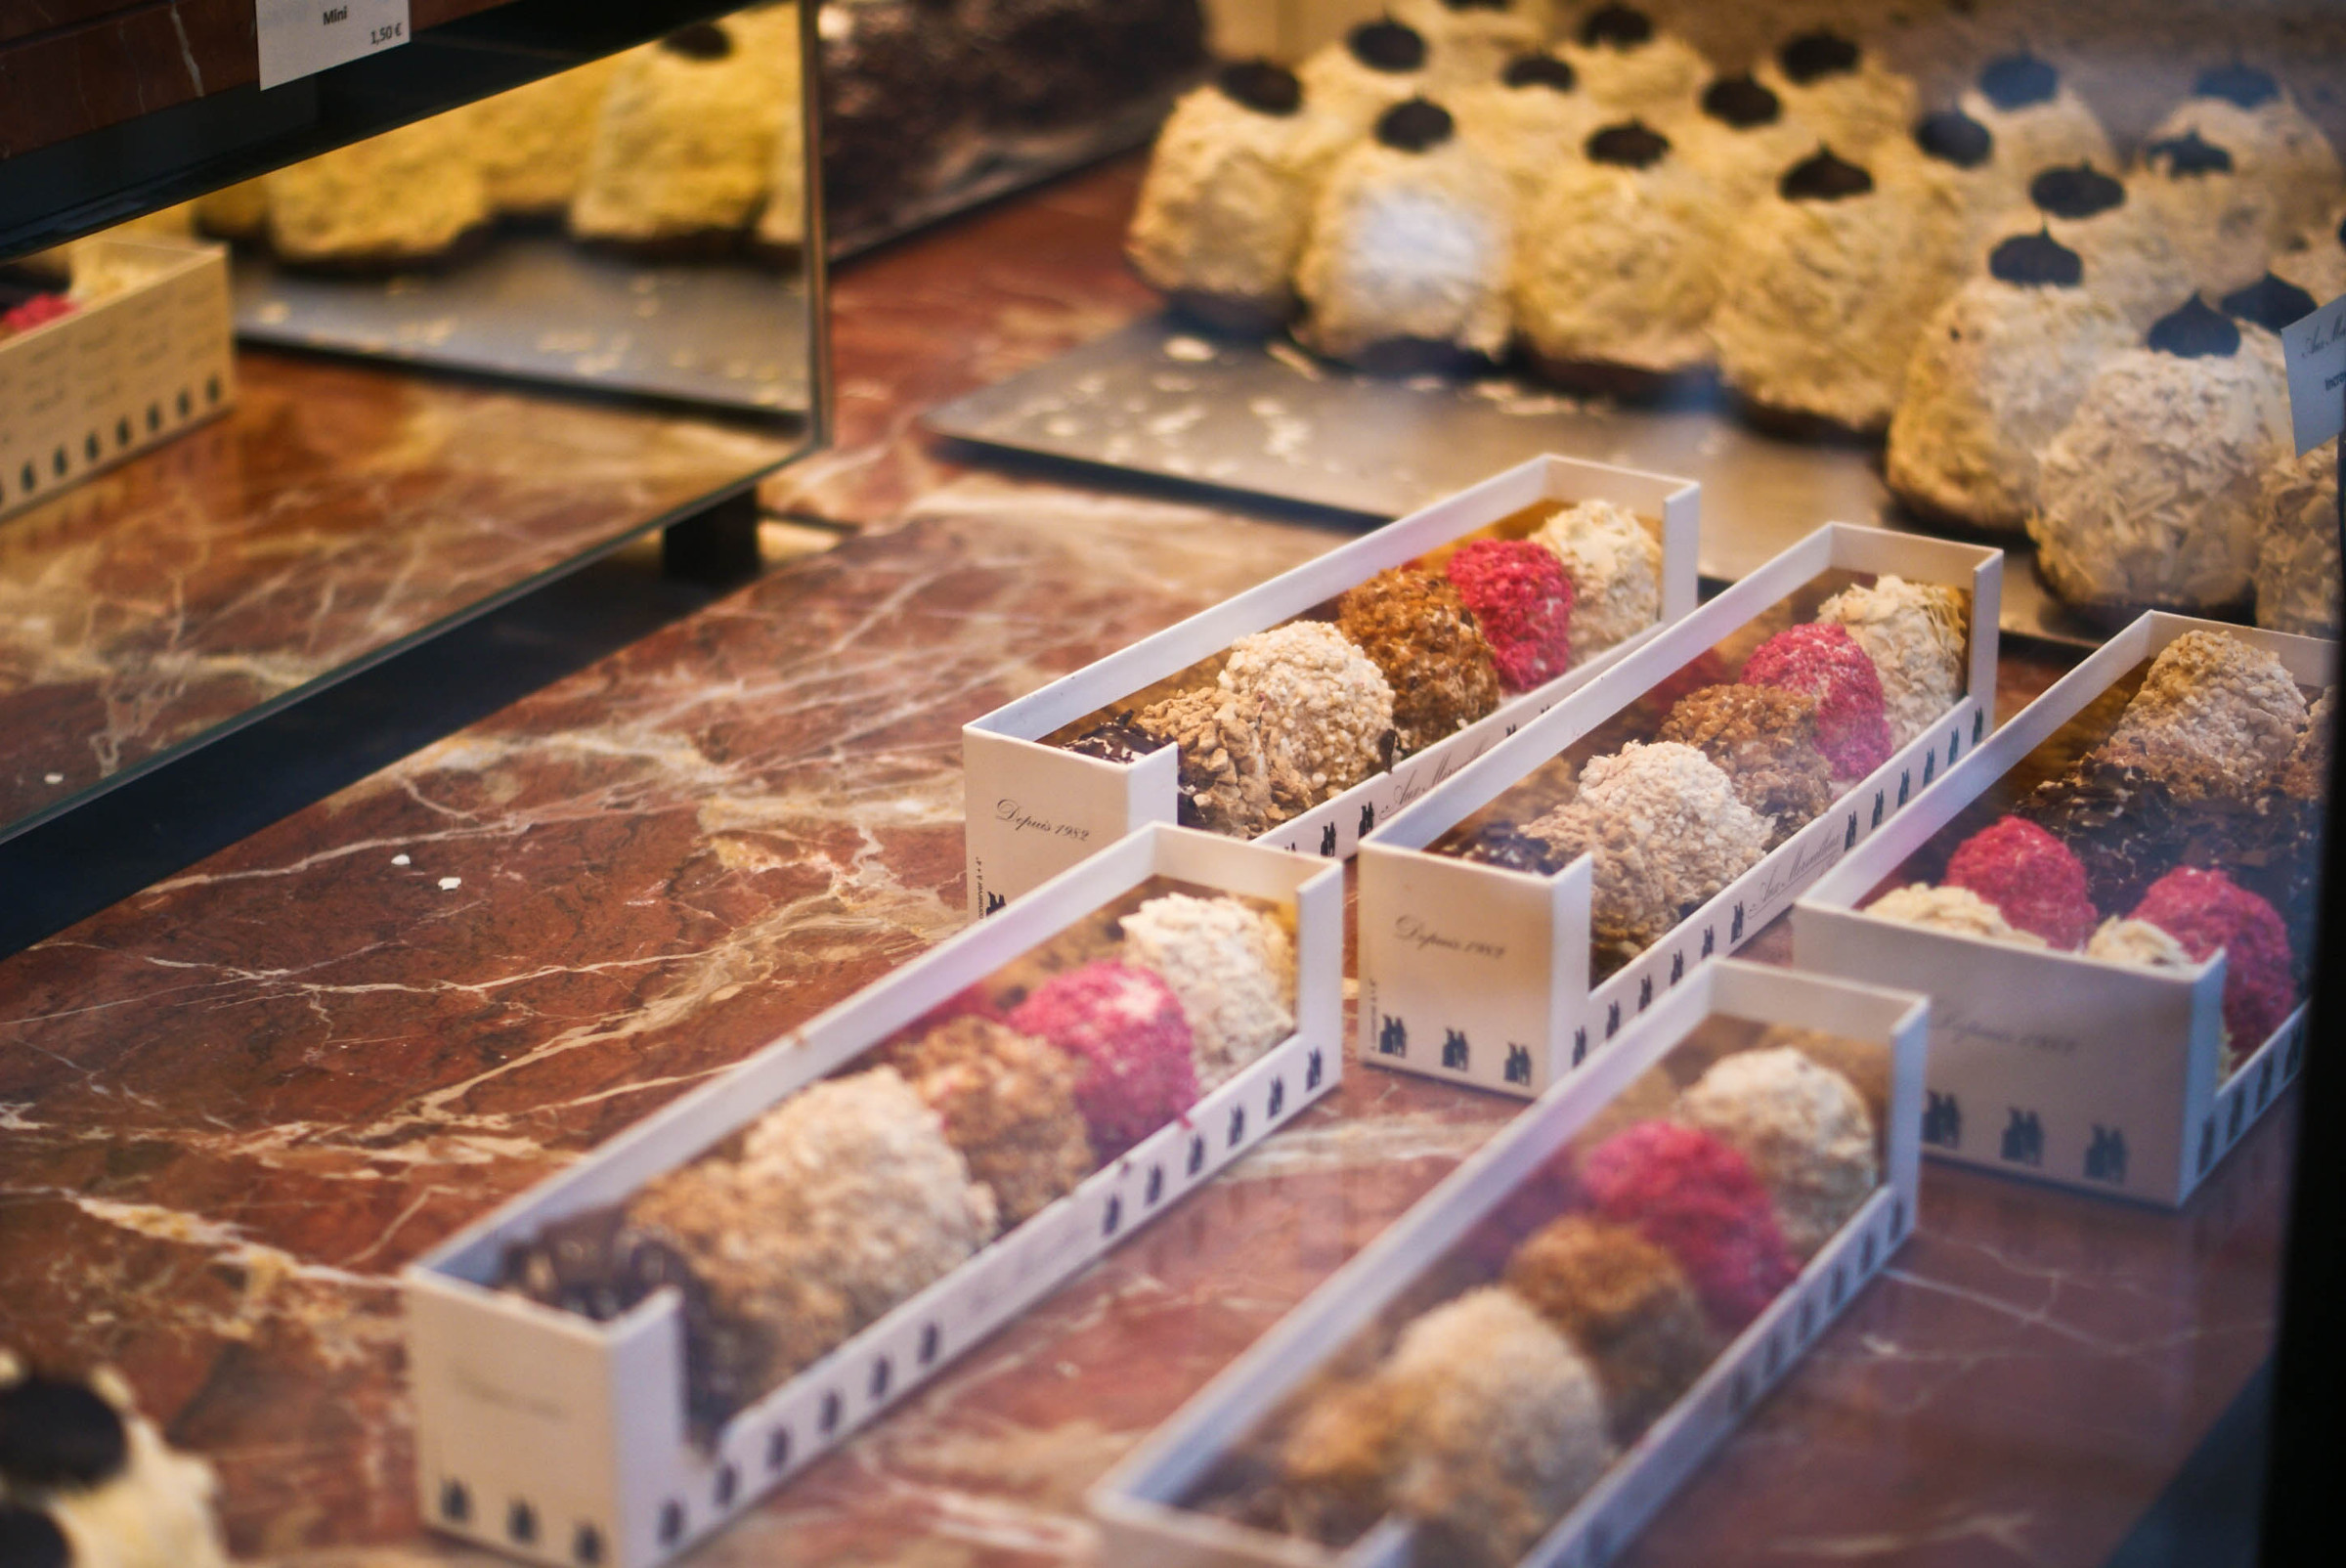 Delicious handcrafted sweets at Aux Merveilleux de Fred, Paris's famed patisserie